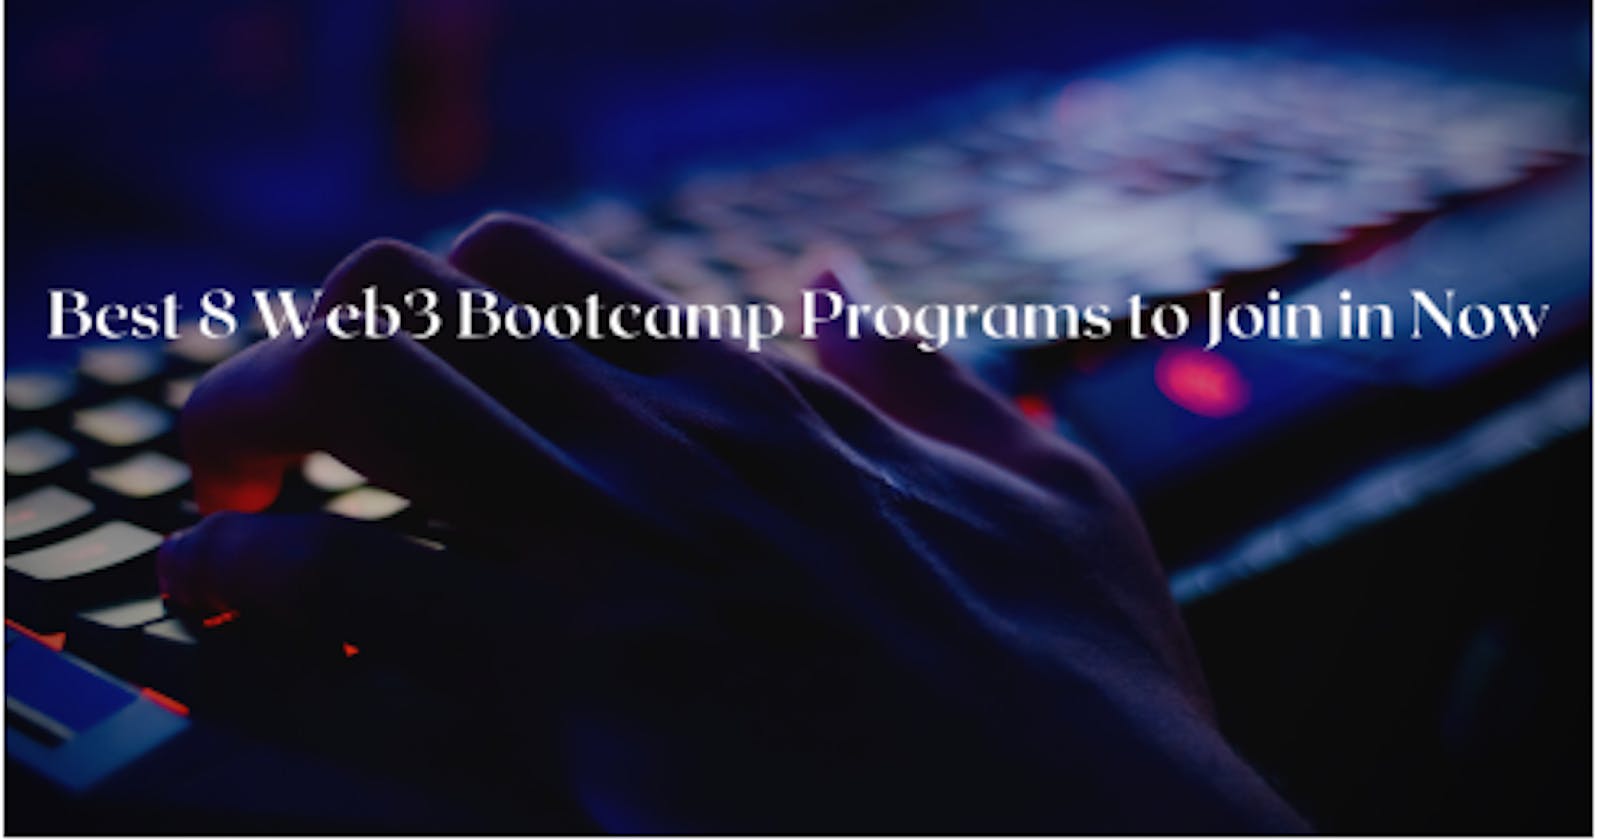 Best 8 Web3 Bootcamp Programs To Join In Now